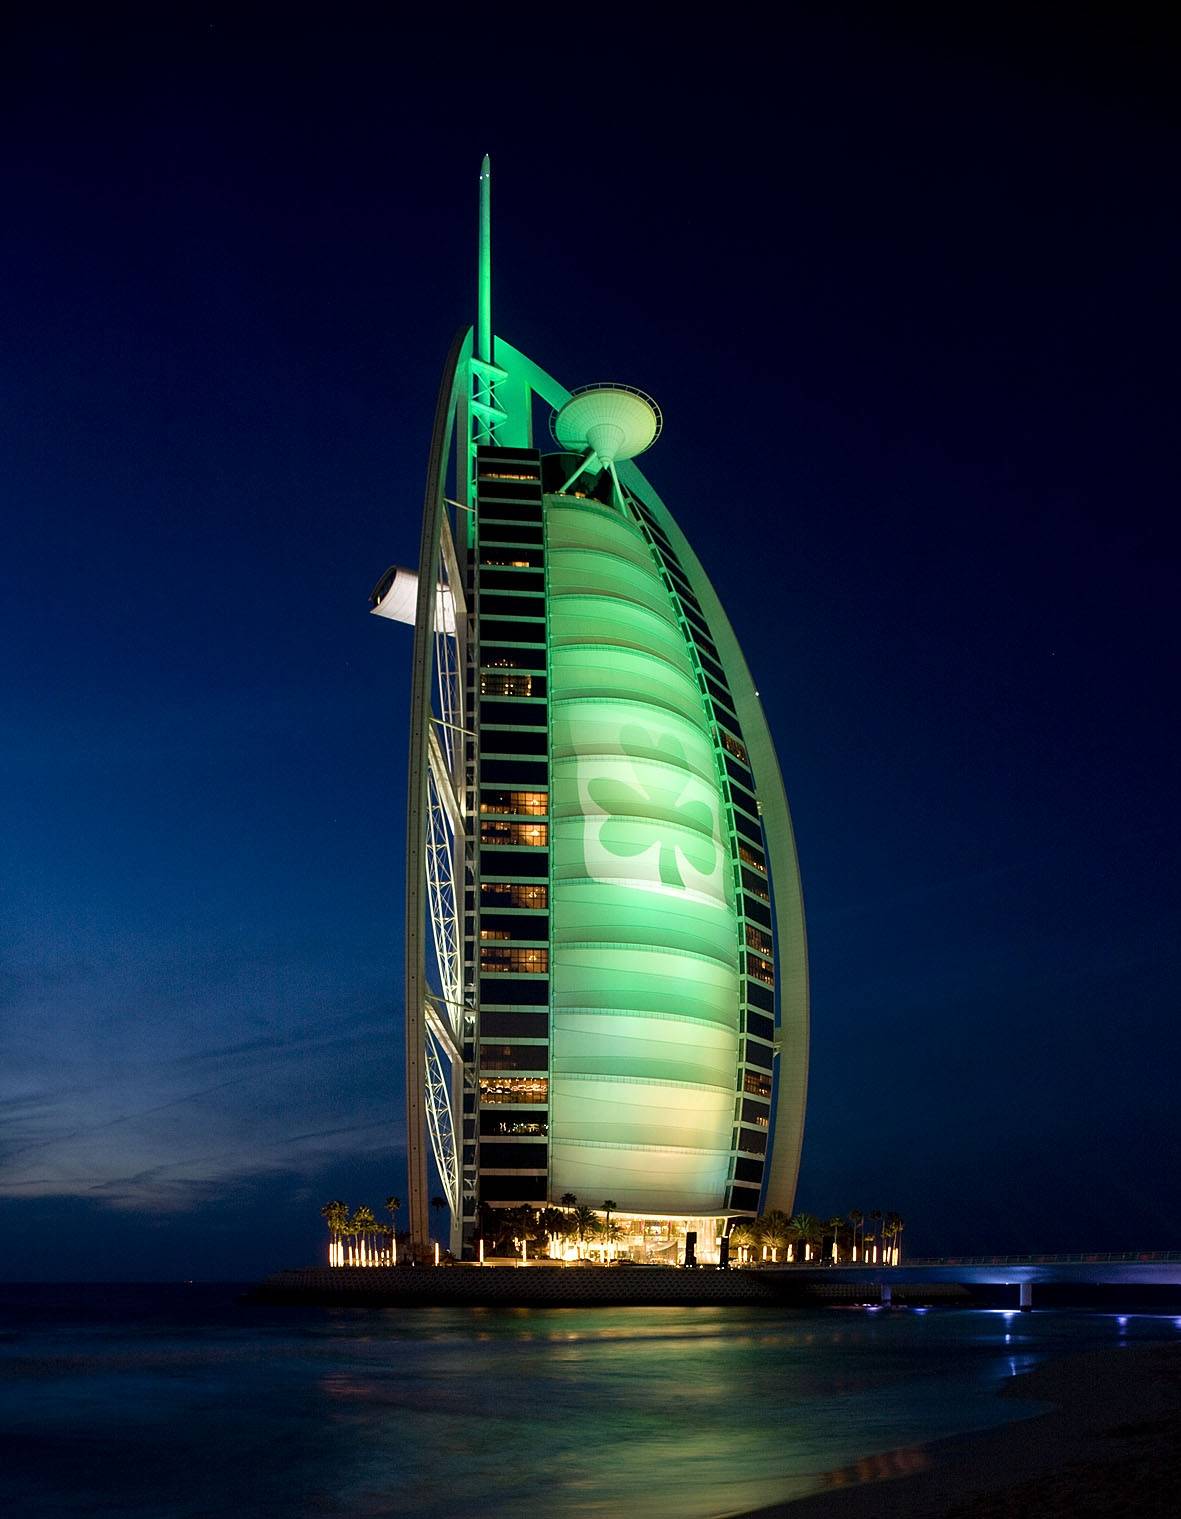 Burj Al Arab lights up ‘green’ and joins the worldwide greening of city icons saluting the Irish community in Dubai by donning the traditional shamrock.